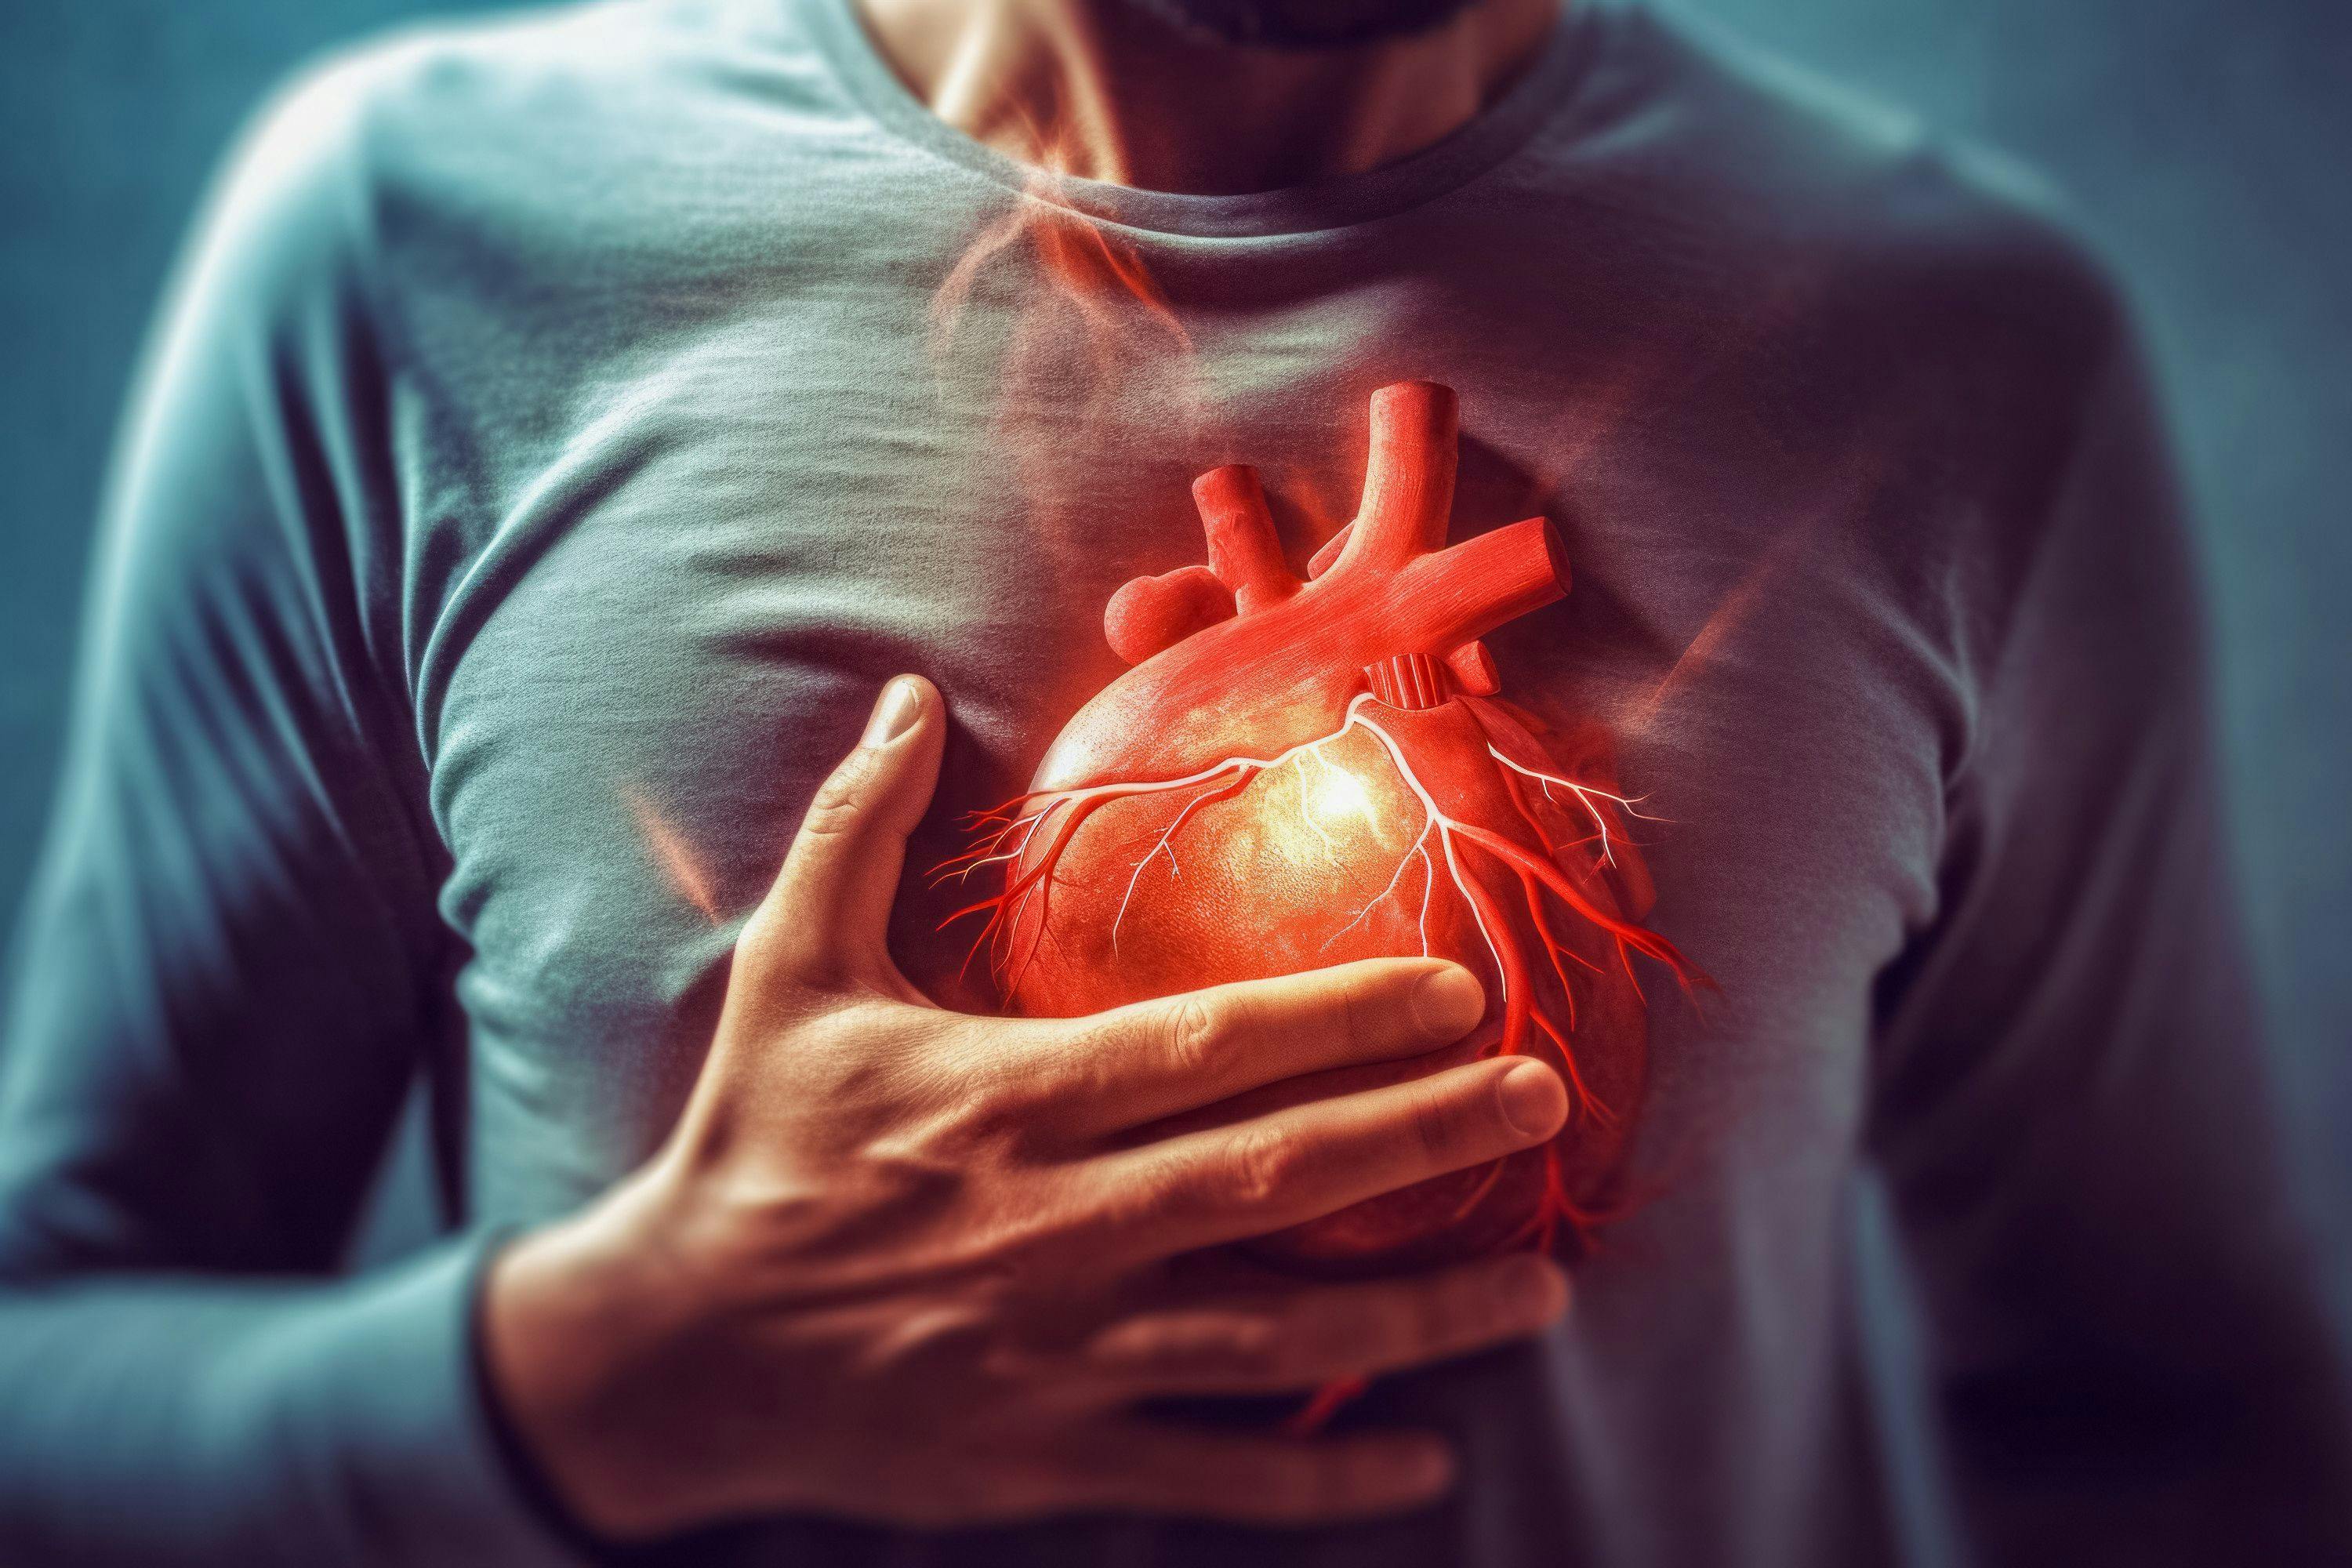 Abstract image of a man with chest pain. Health concept. | Image Credit: top images - stock.adobe.com